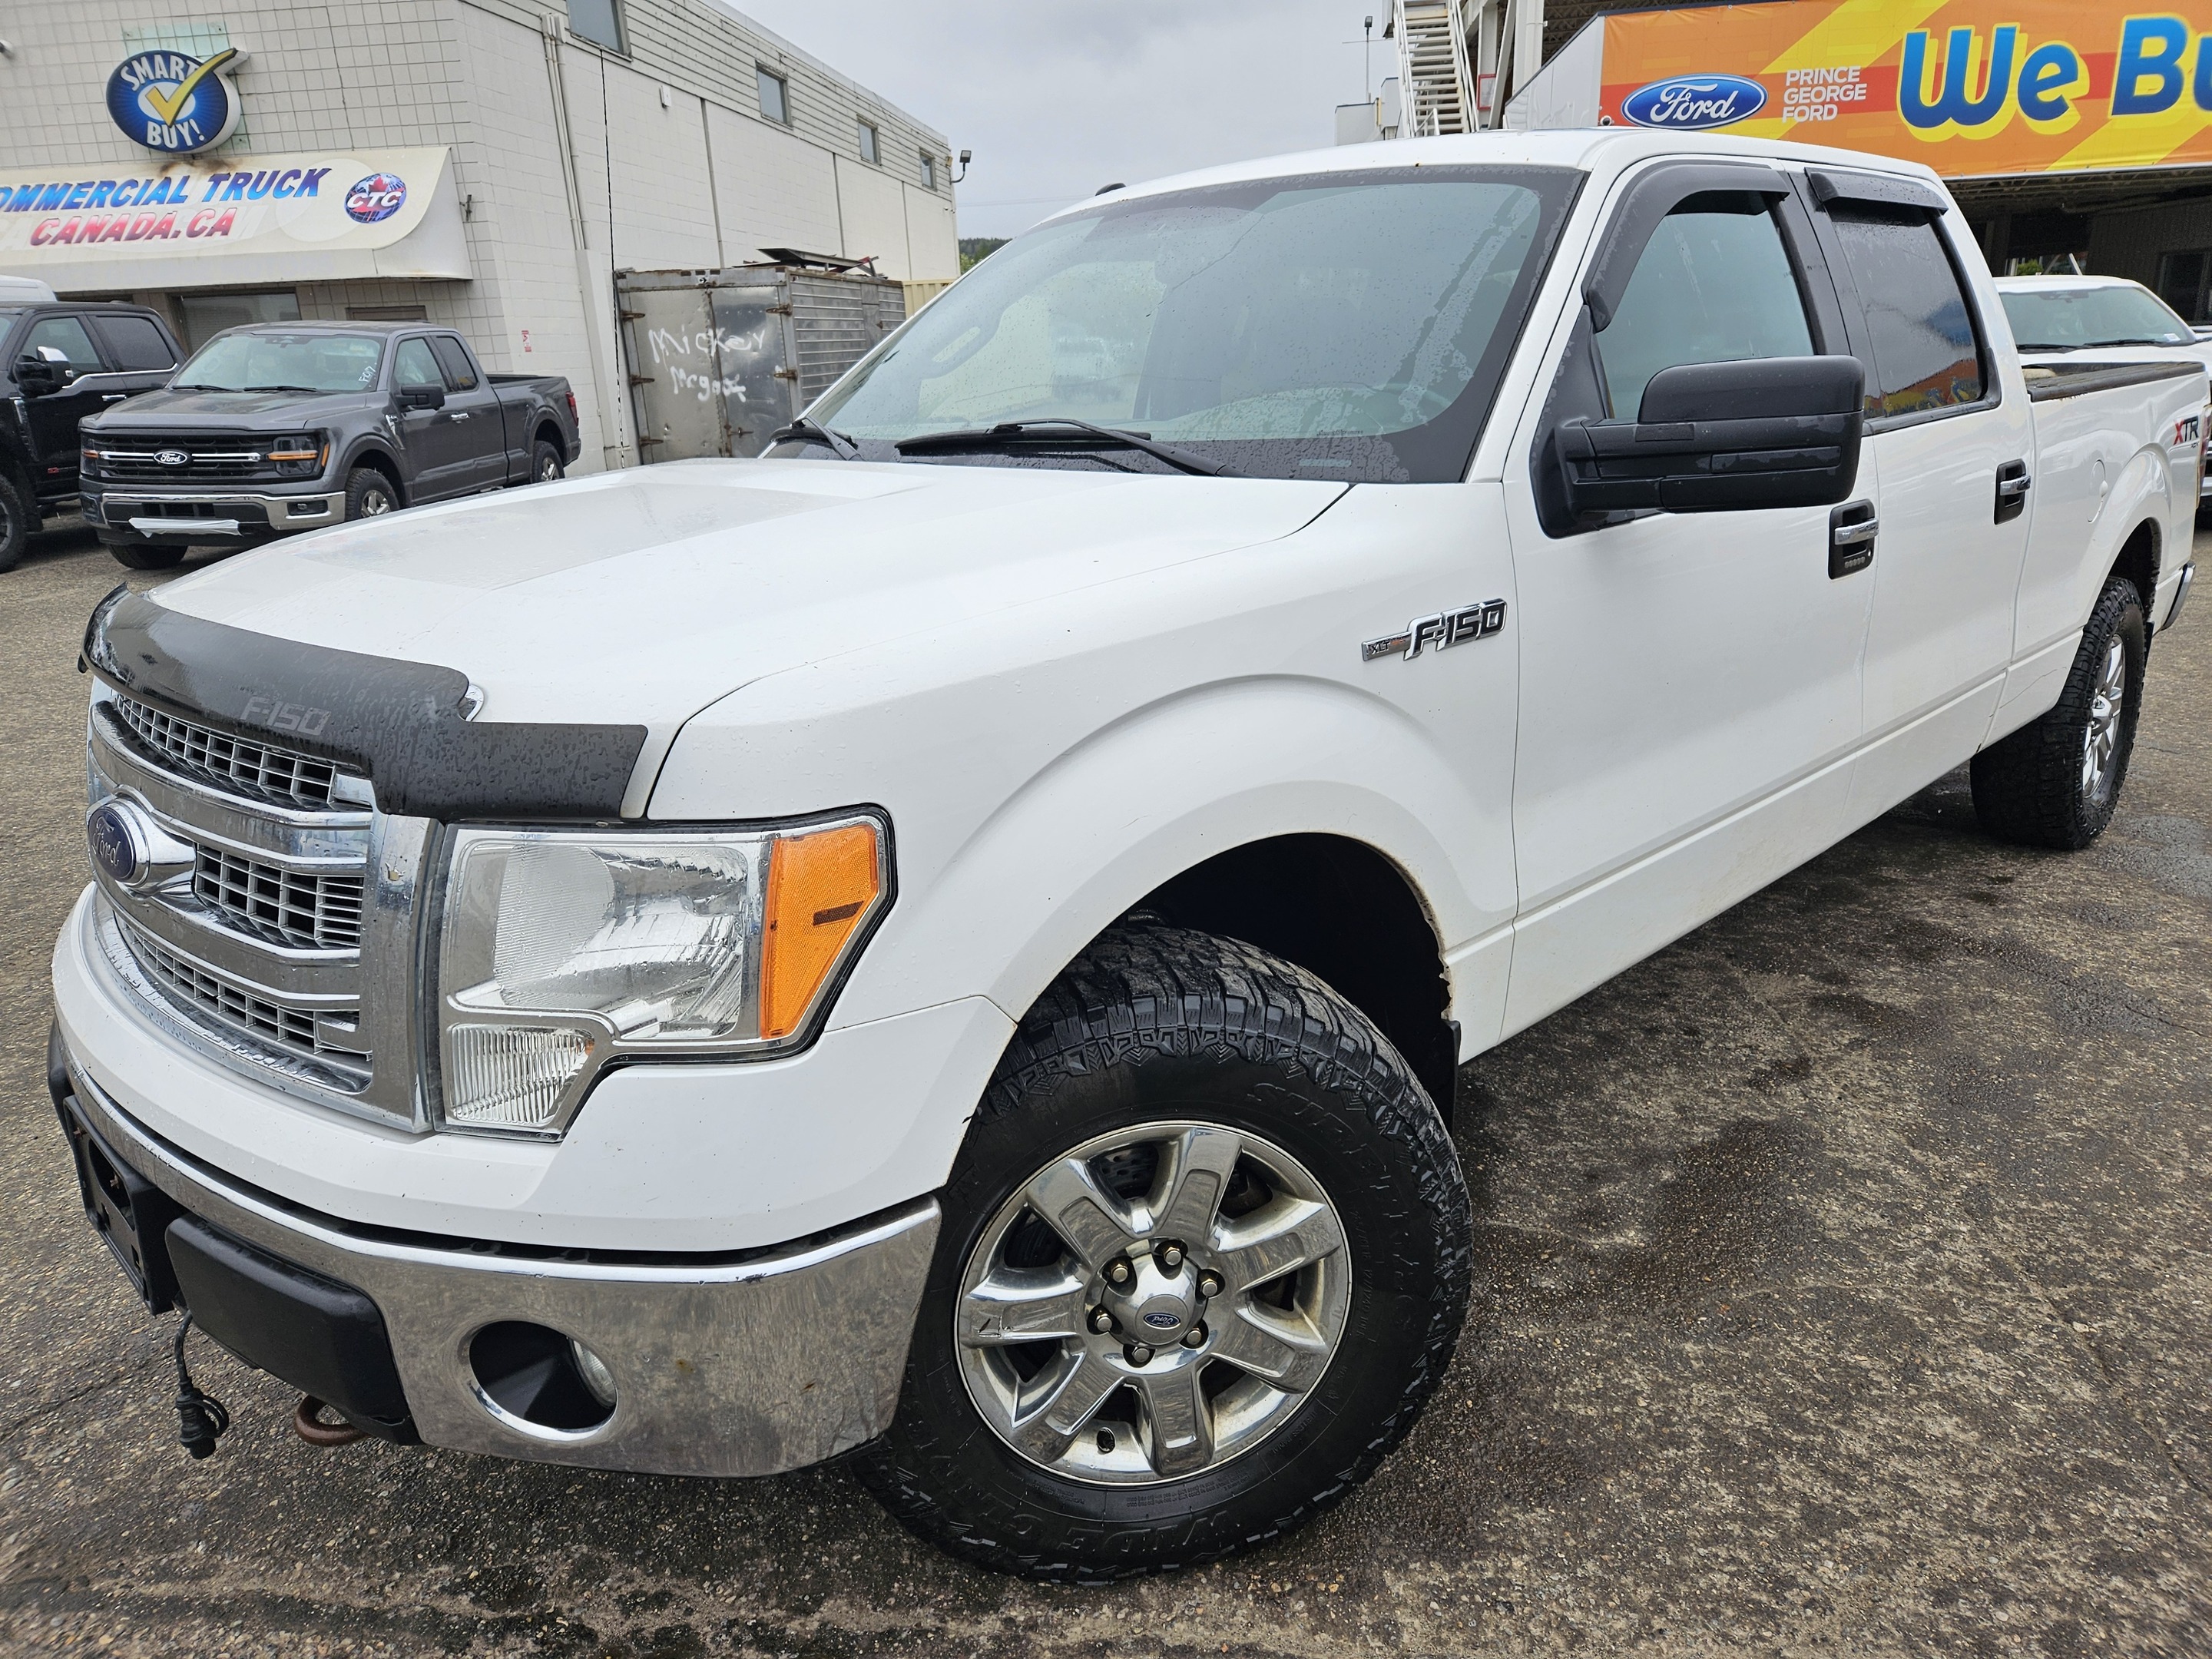 2013 Ford F-150 XLT | Tow Off The Lot |Convenience/Trailer Tow PKG